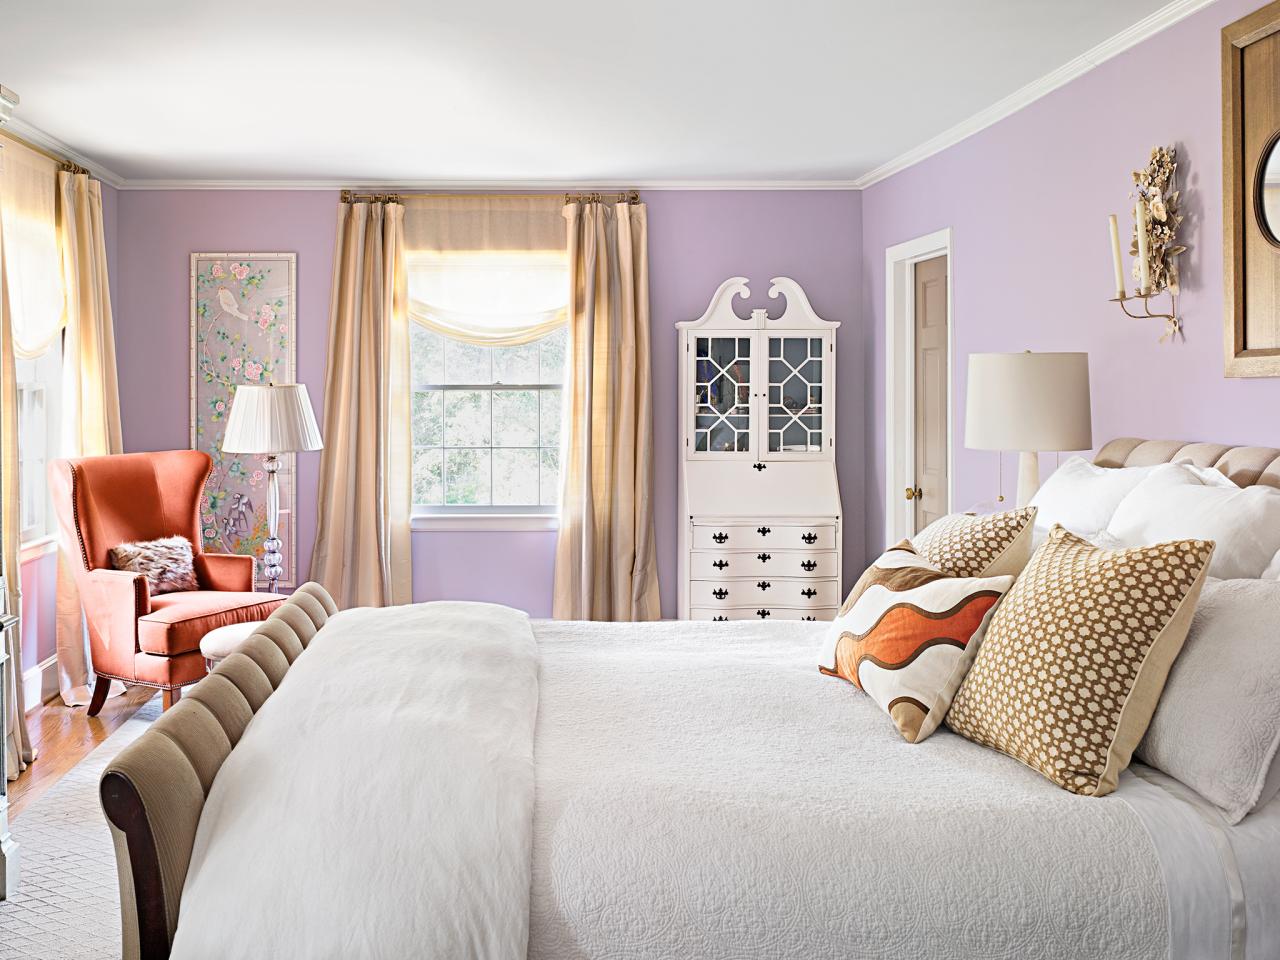 Design Pros Tell Us How To Make A Bedroom Brighter